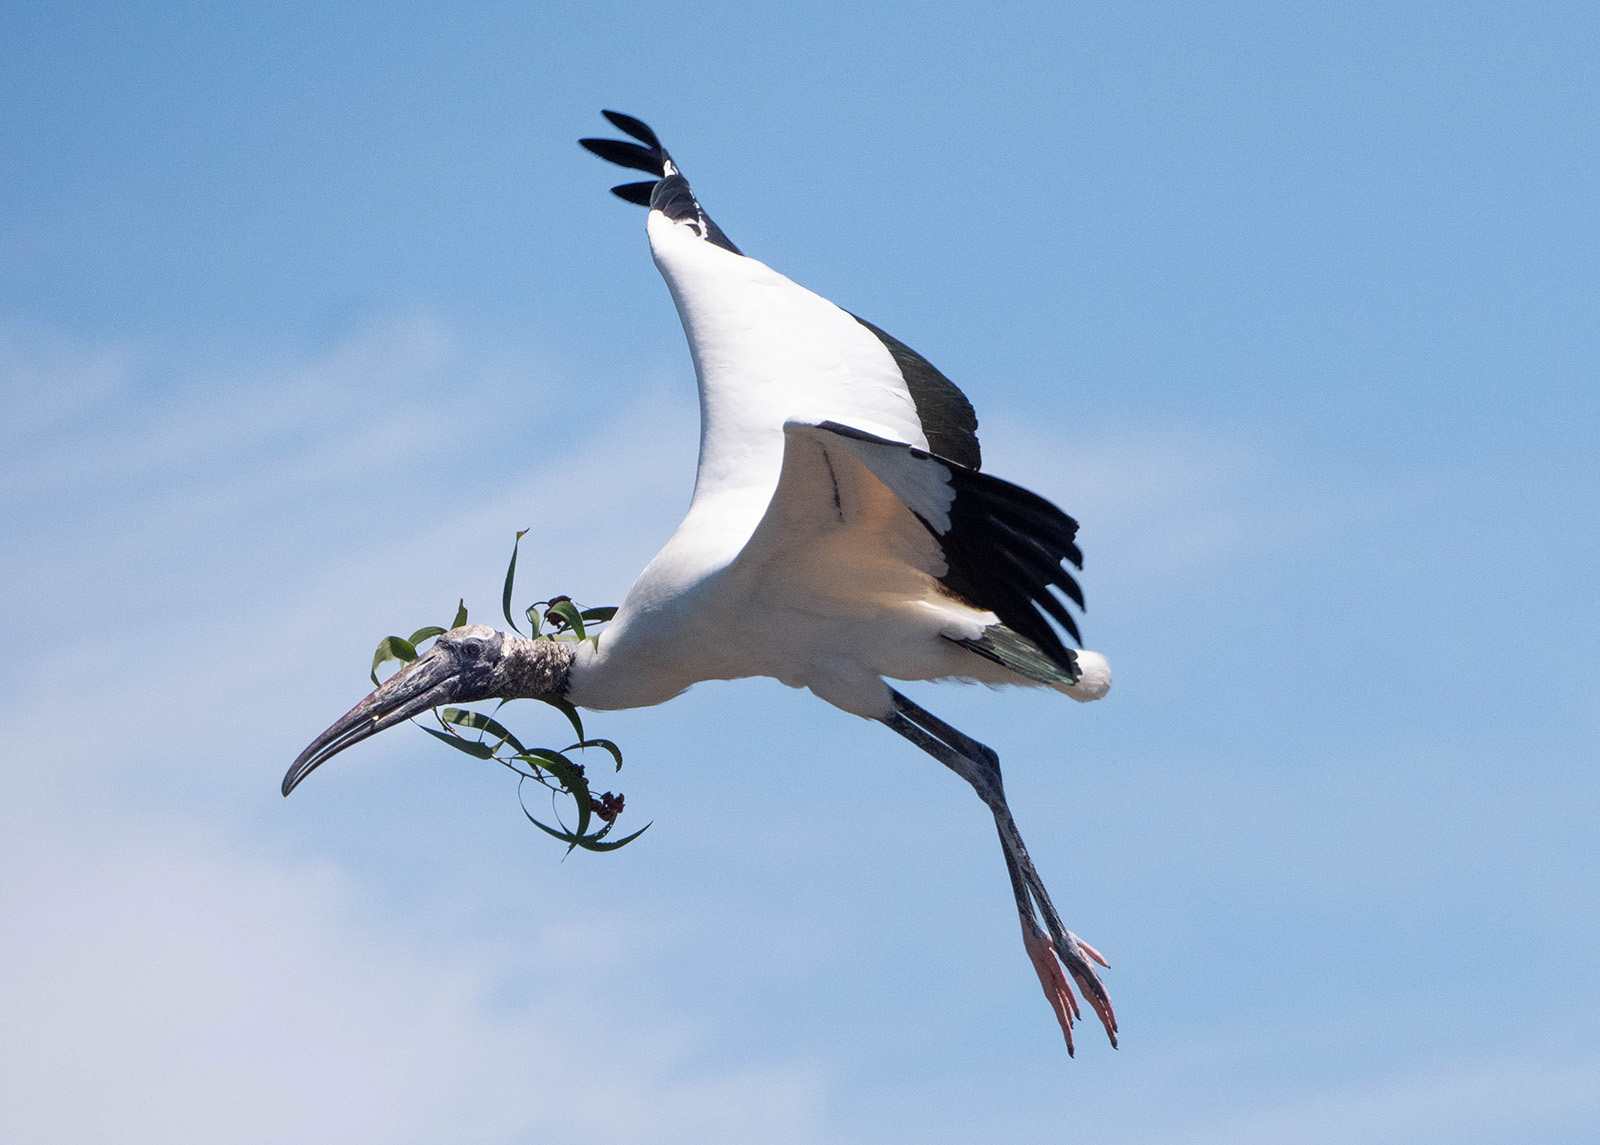 Wood Stork in flight, with a branch in its bill. Photo: Cheryl Black.